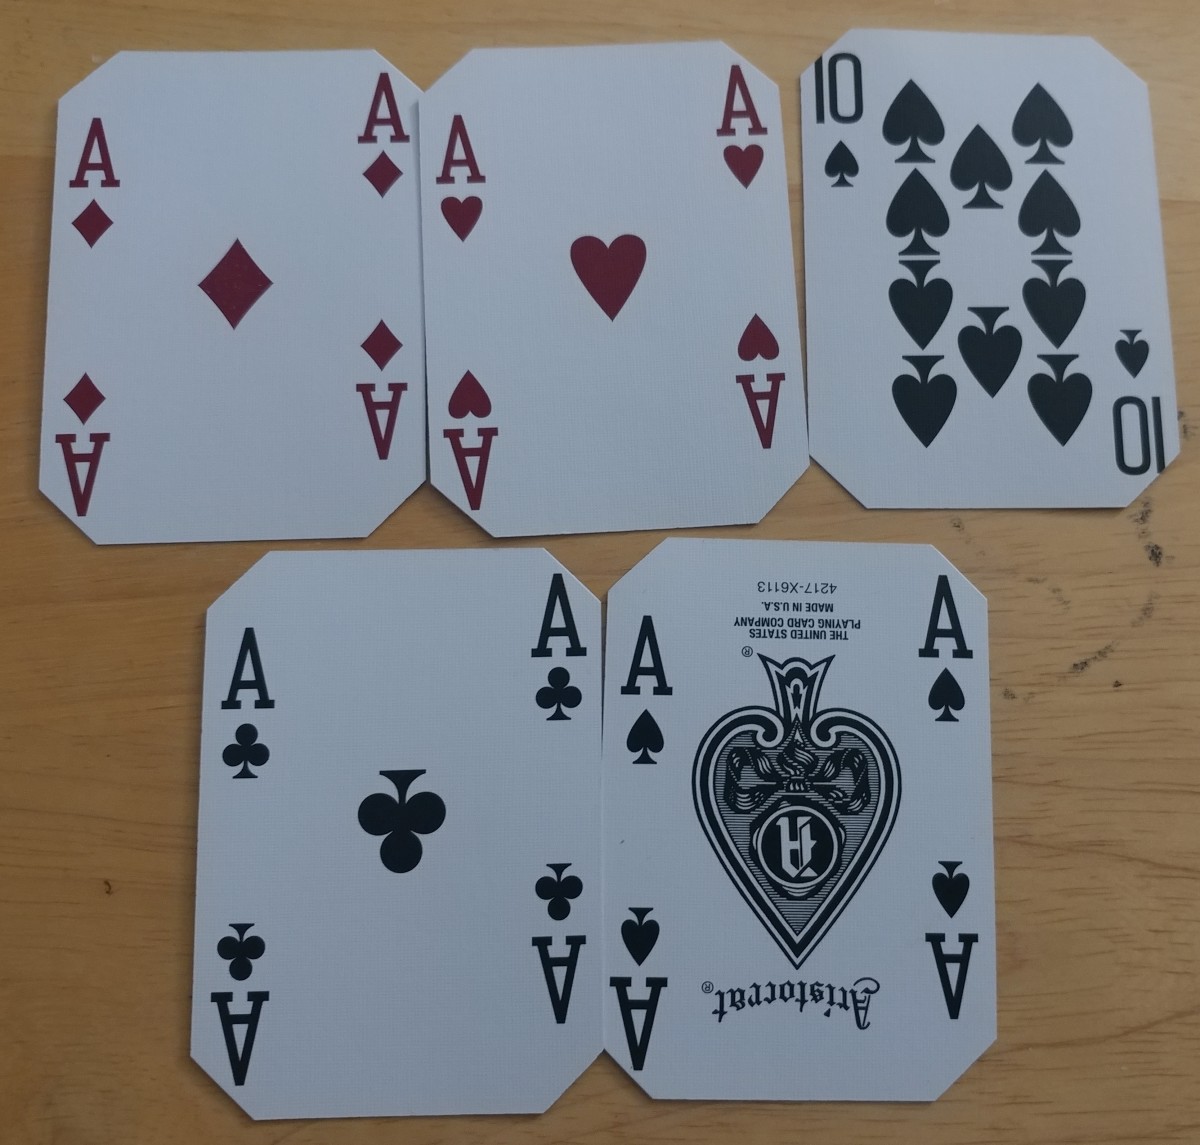 This is four of a kind in poker.